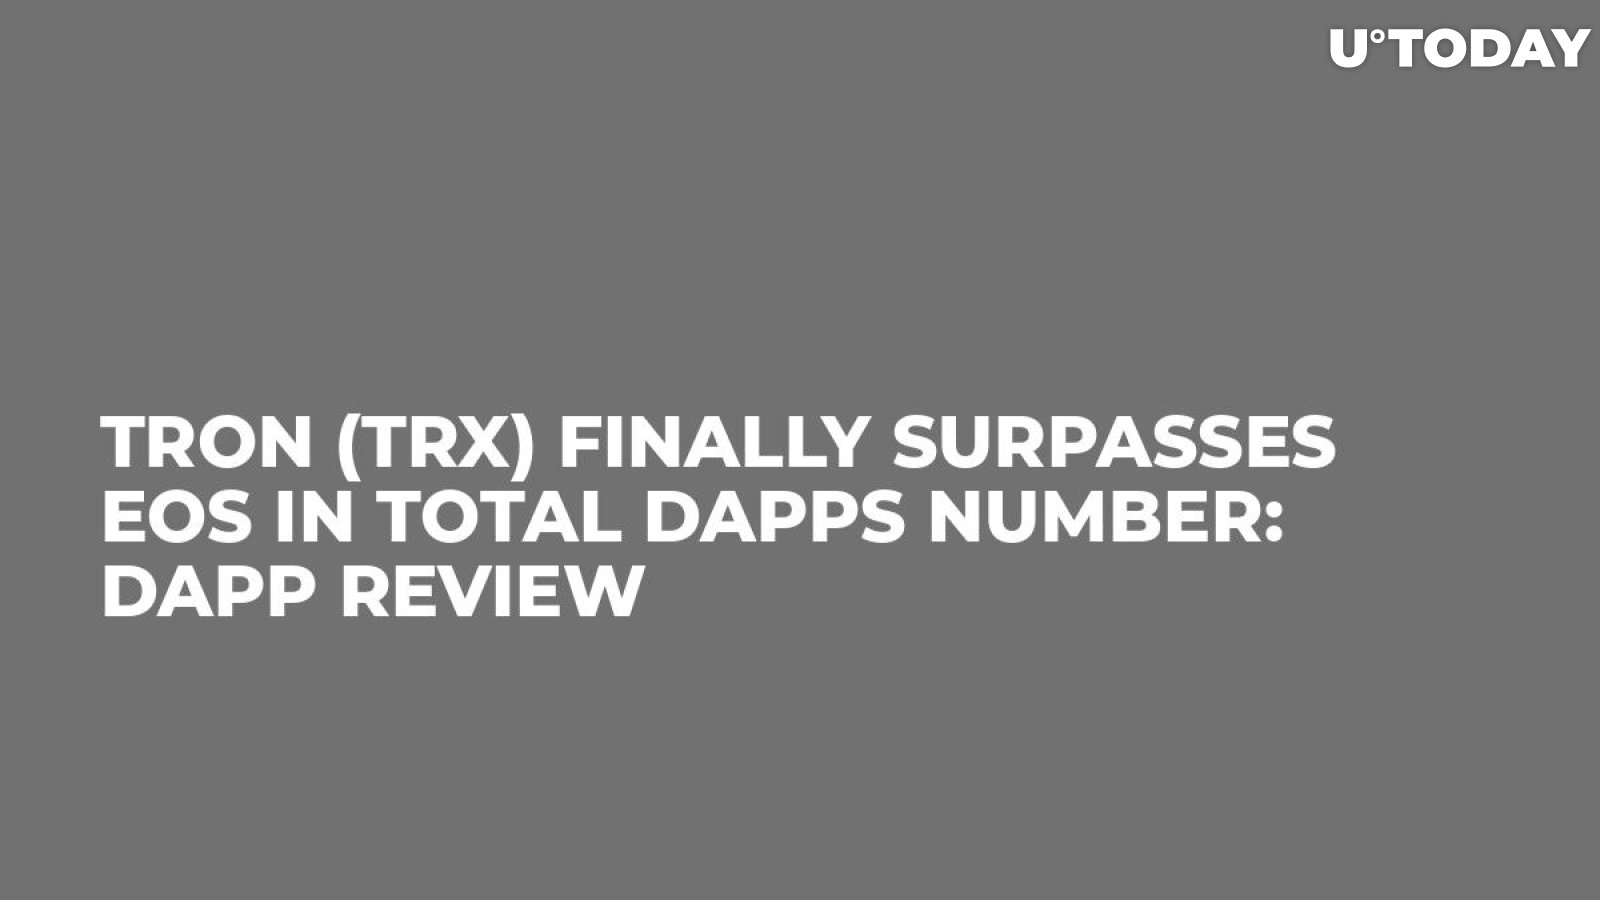 Tron (TRX) Finally Surpasses EOS in Total dApps Number: dApp Review